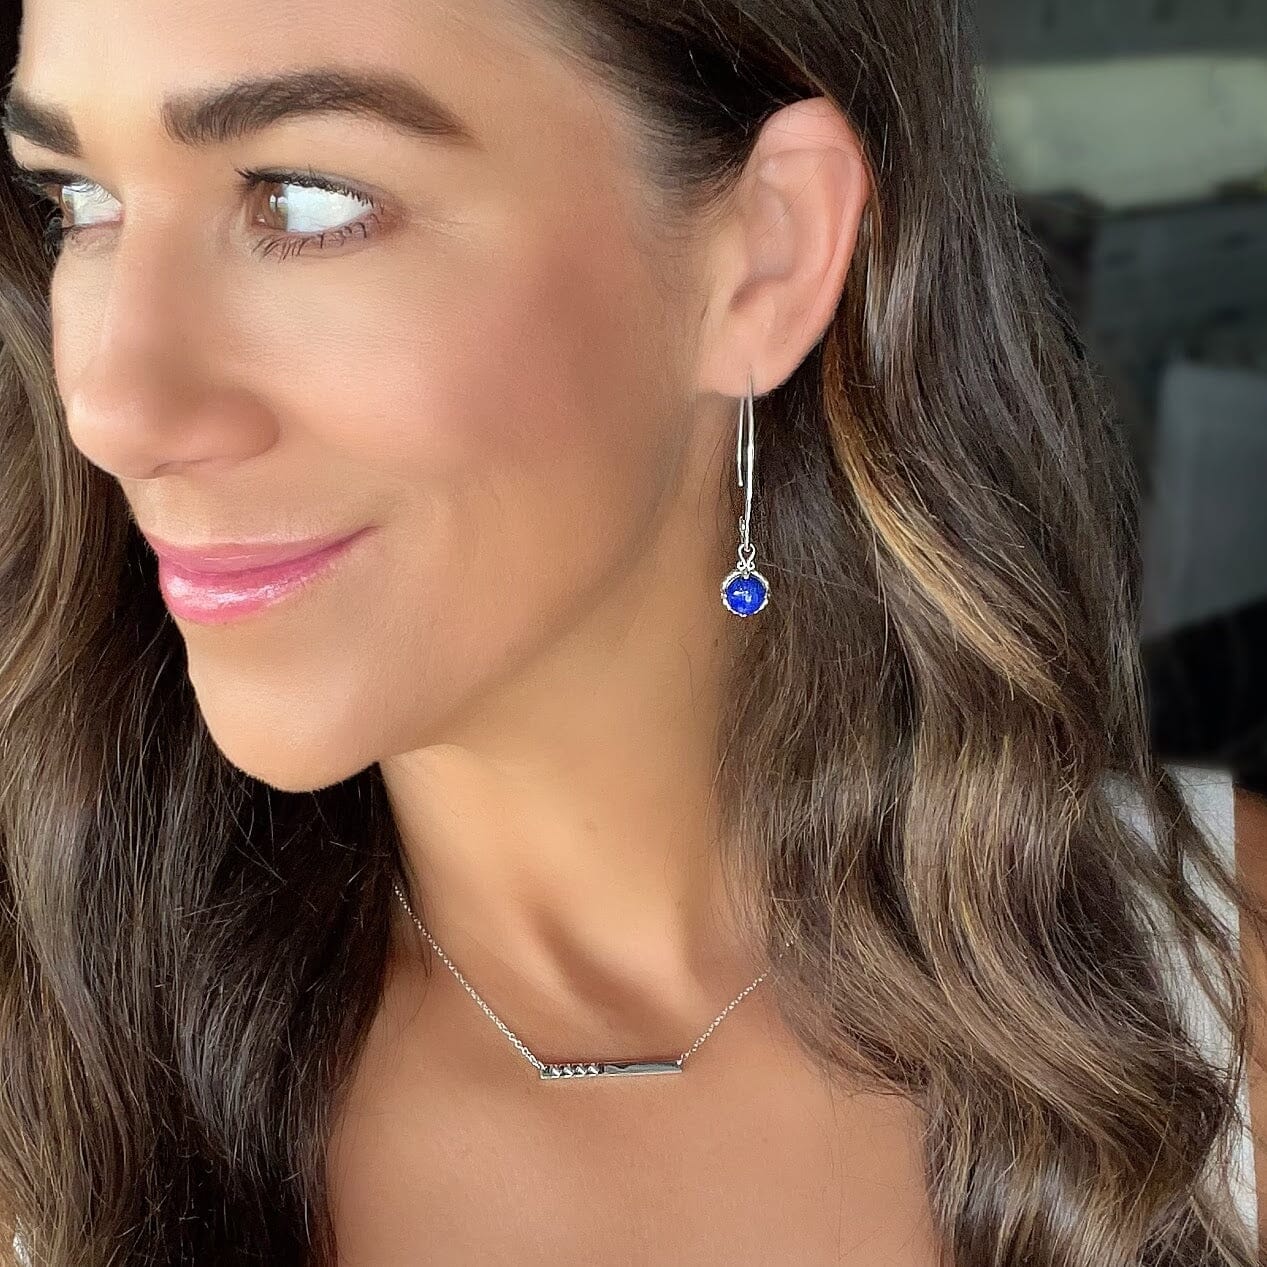 Lapis Lazuli Earrings featured with Love Story Necklace